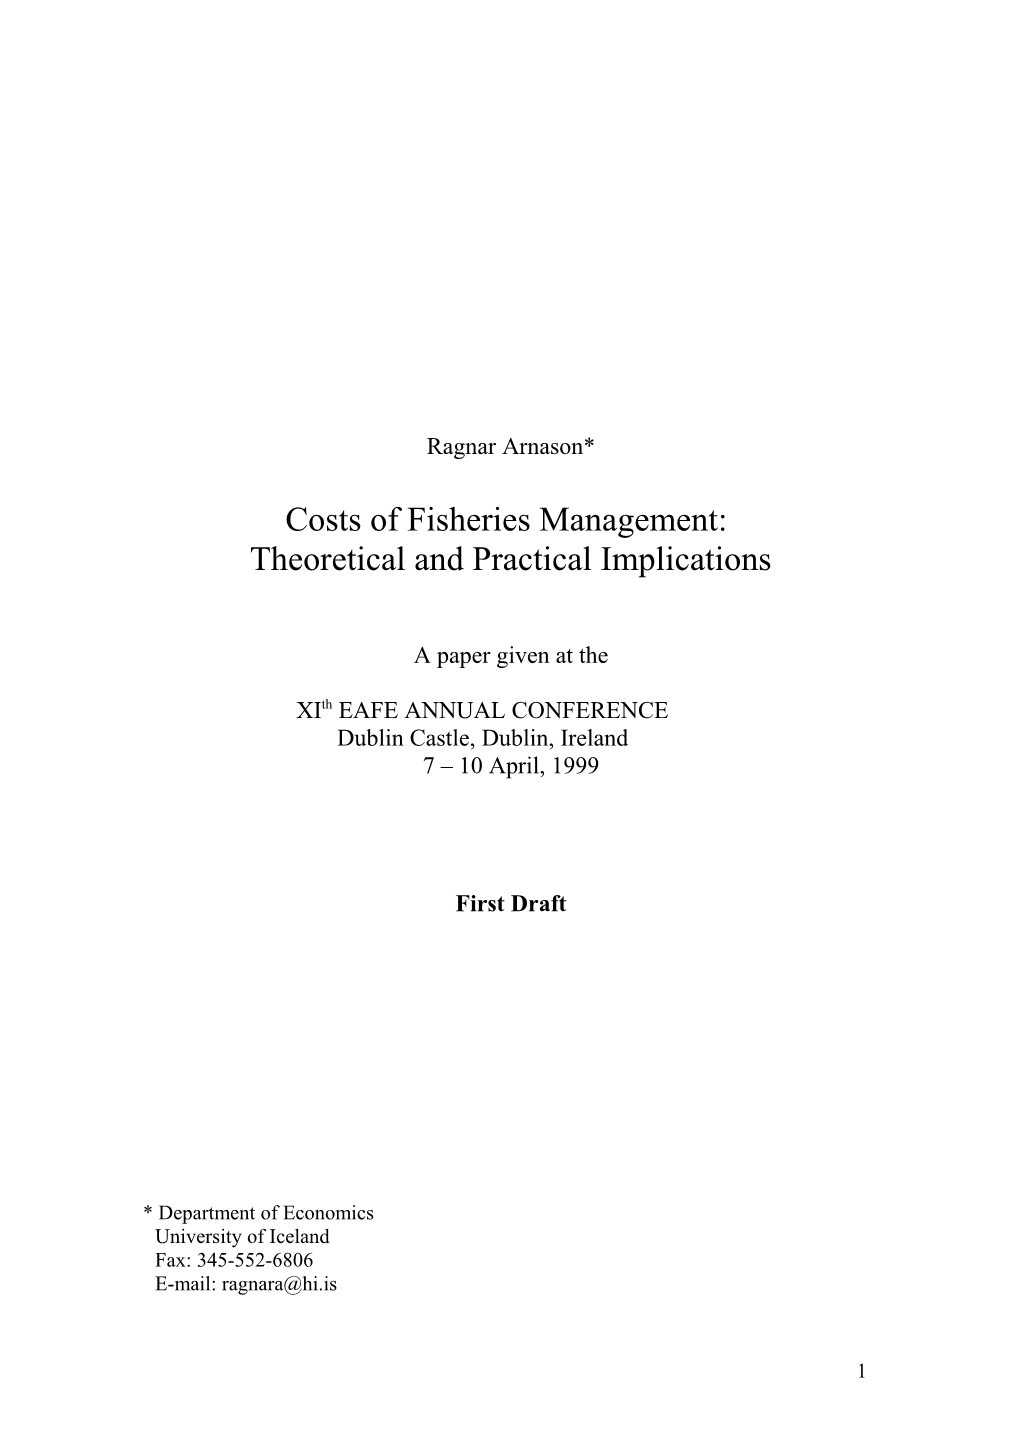 Theoretical and Practical Implications